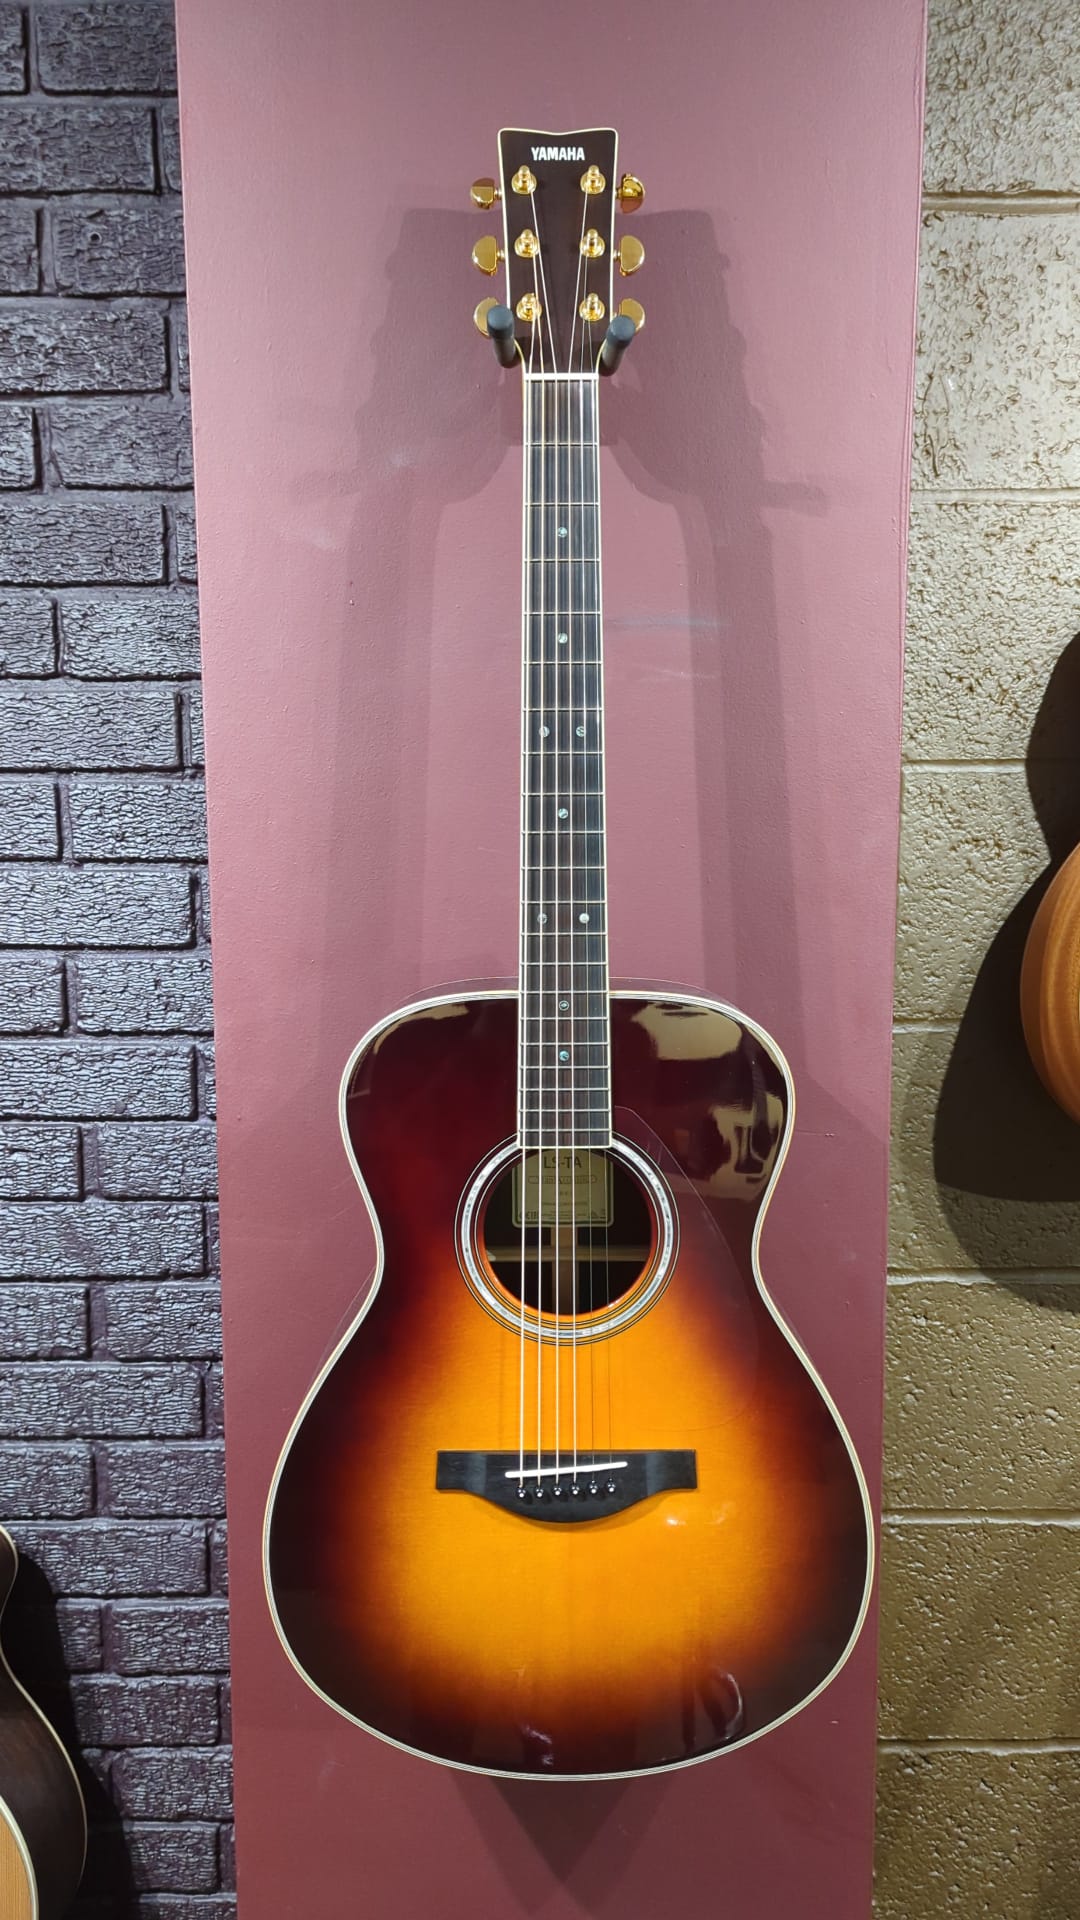 Yamaha LS-TA (used) A1 condition,  for sale at Richards Guitars.